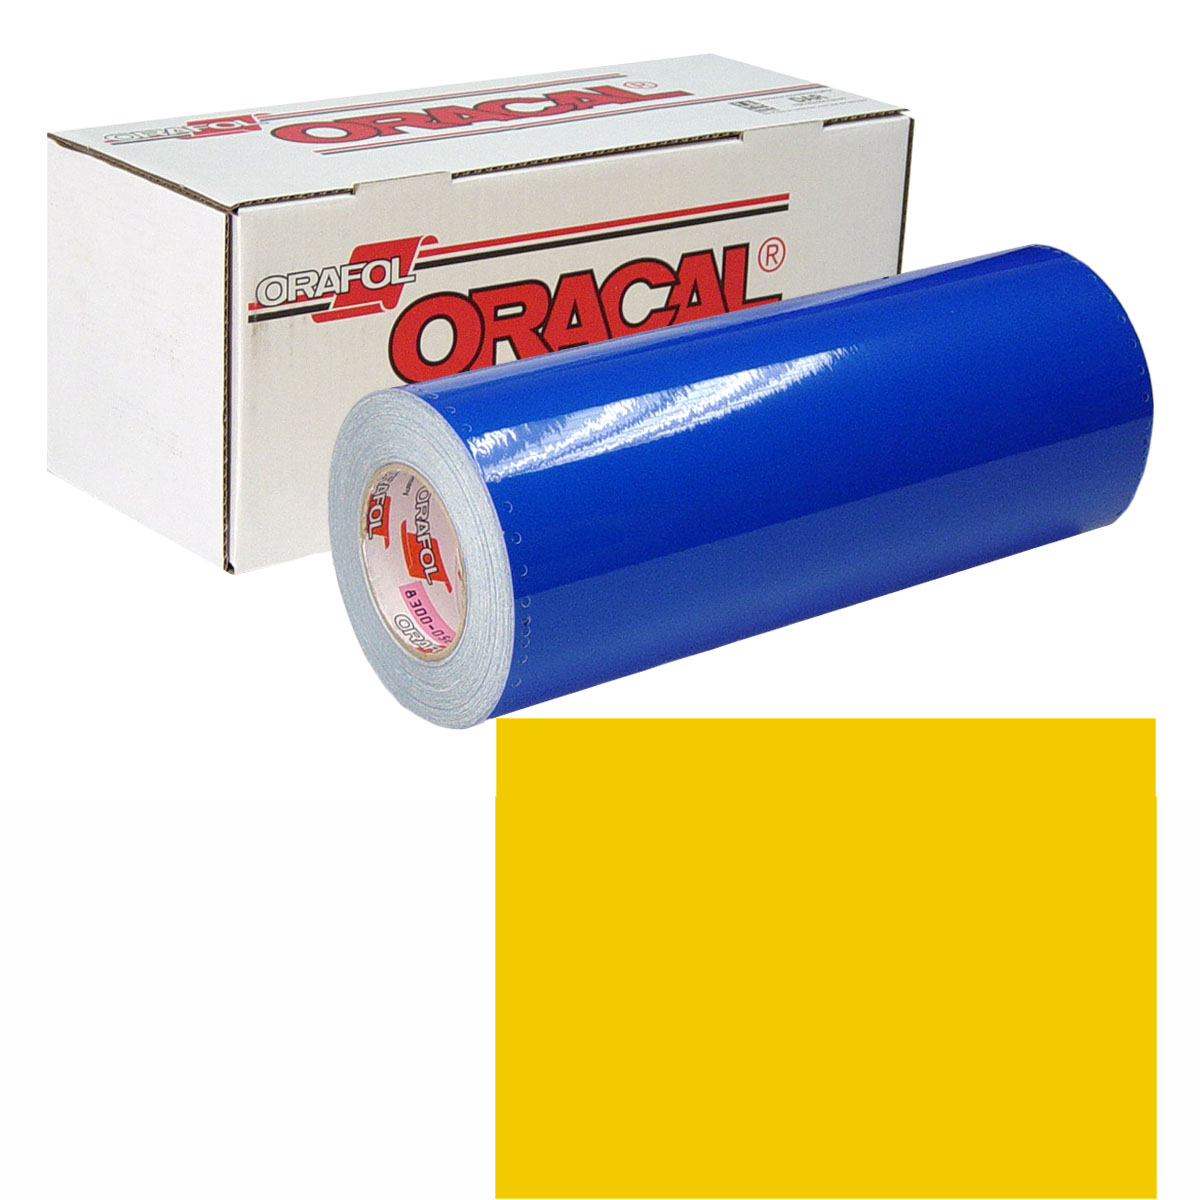 ORACAL 631 15in X 10yd 022 Light Yellow